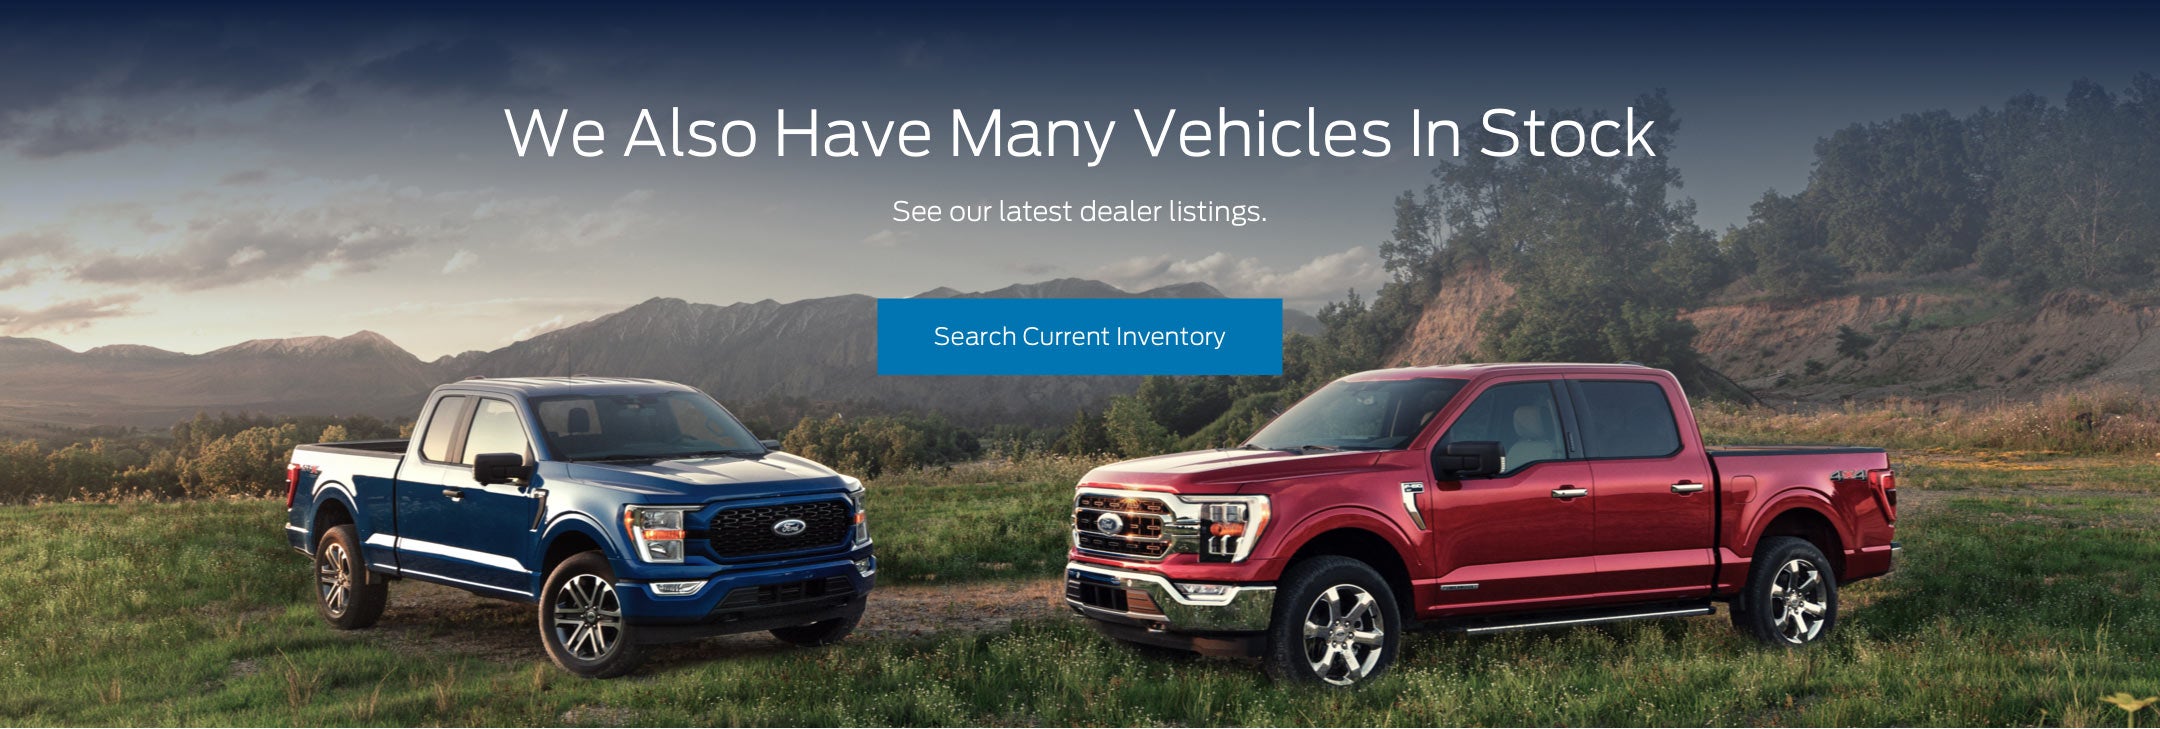 Ford vehicles in stock | White's Ford in Urbana OH